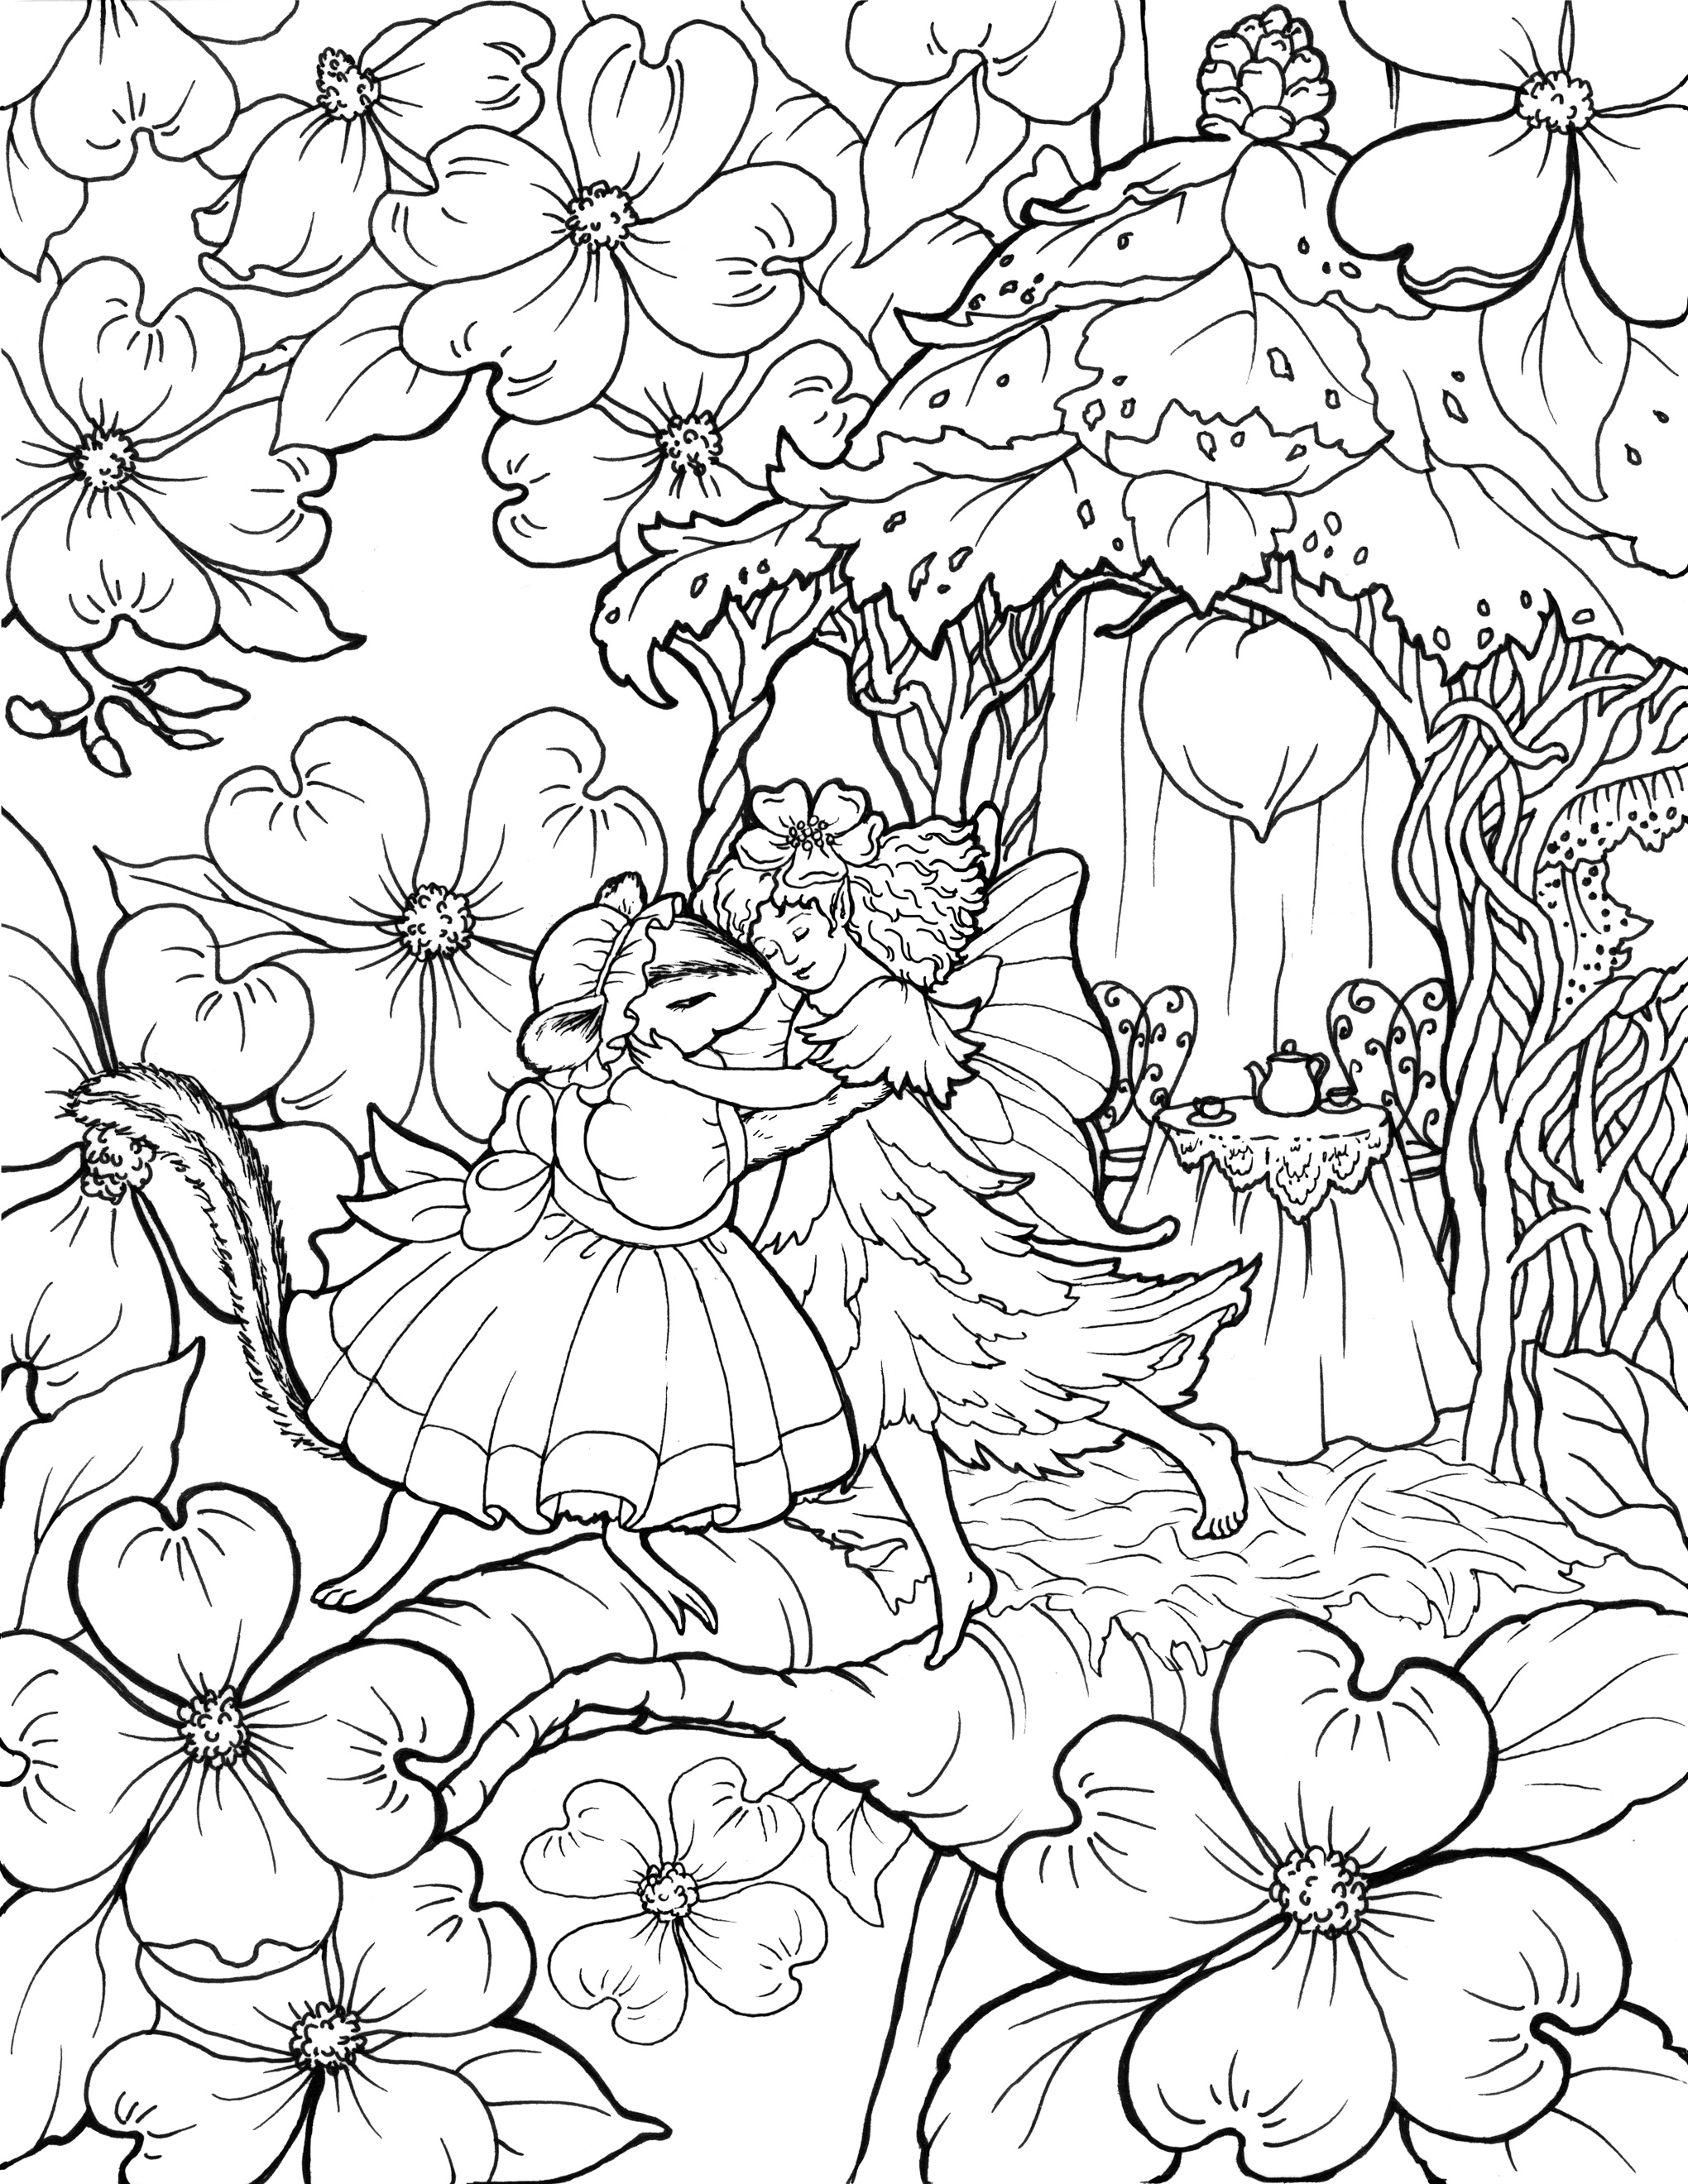 Printable Fairy Coloring Pages For Adults at GetDrawings Free download